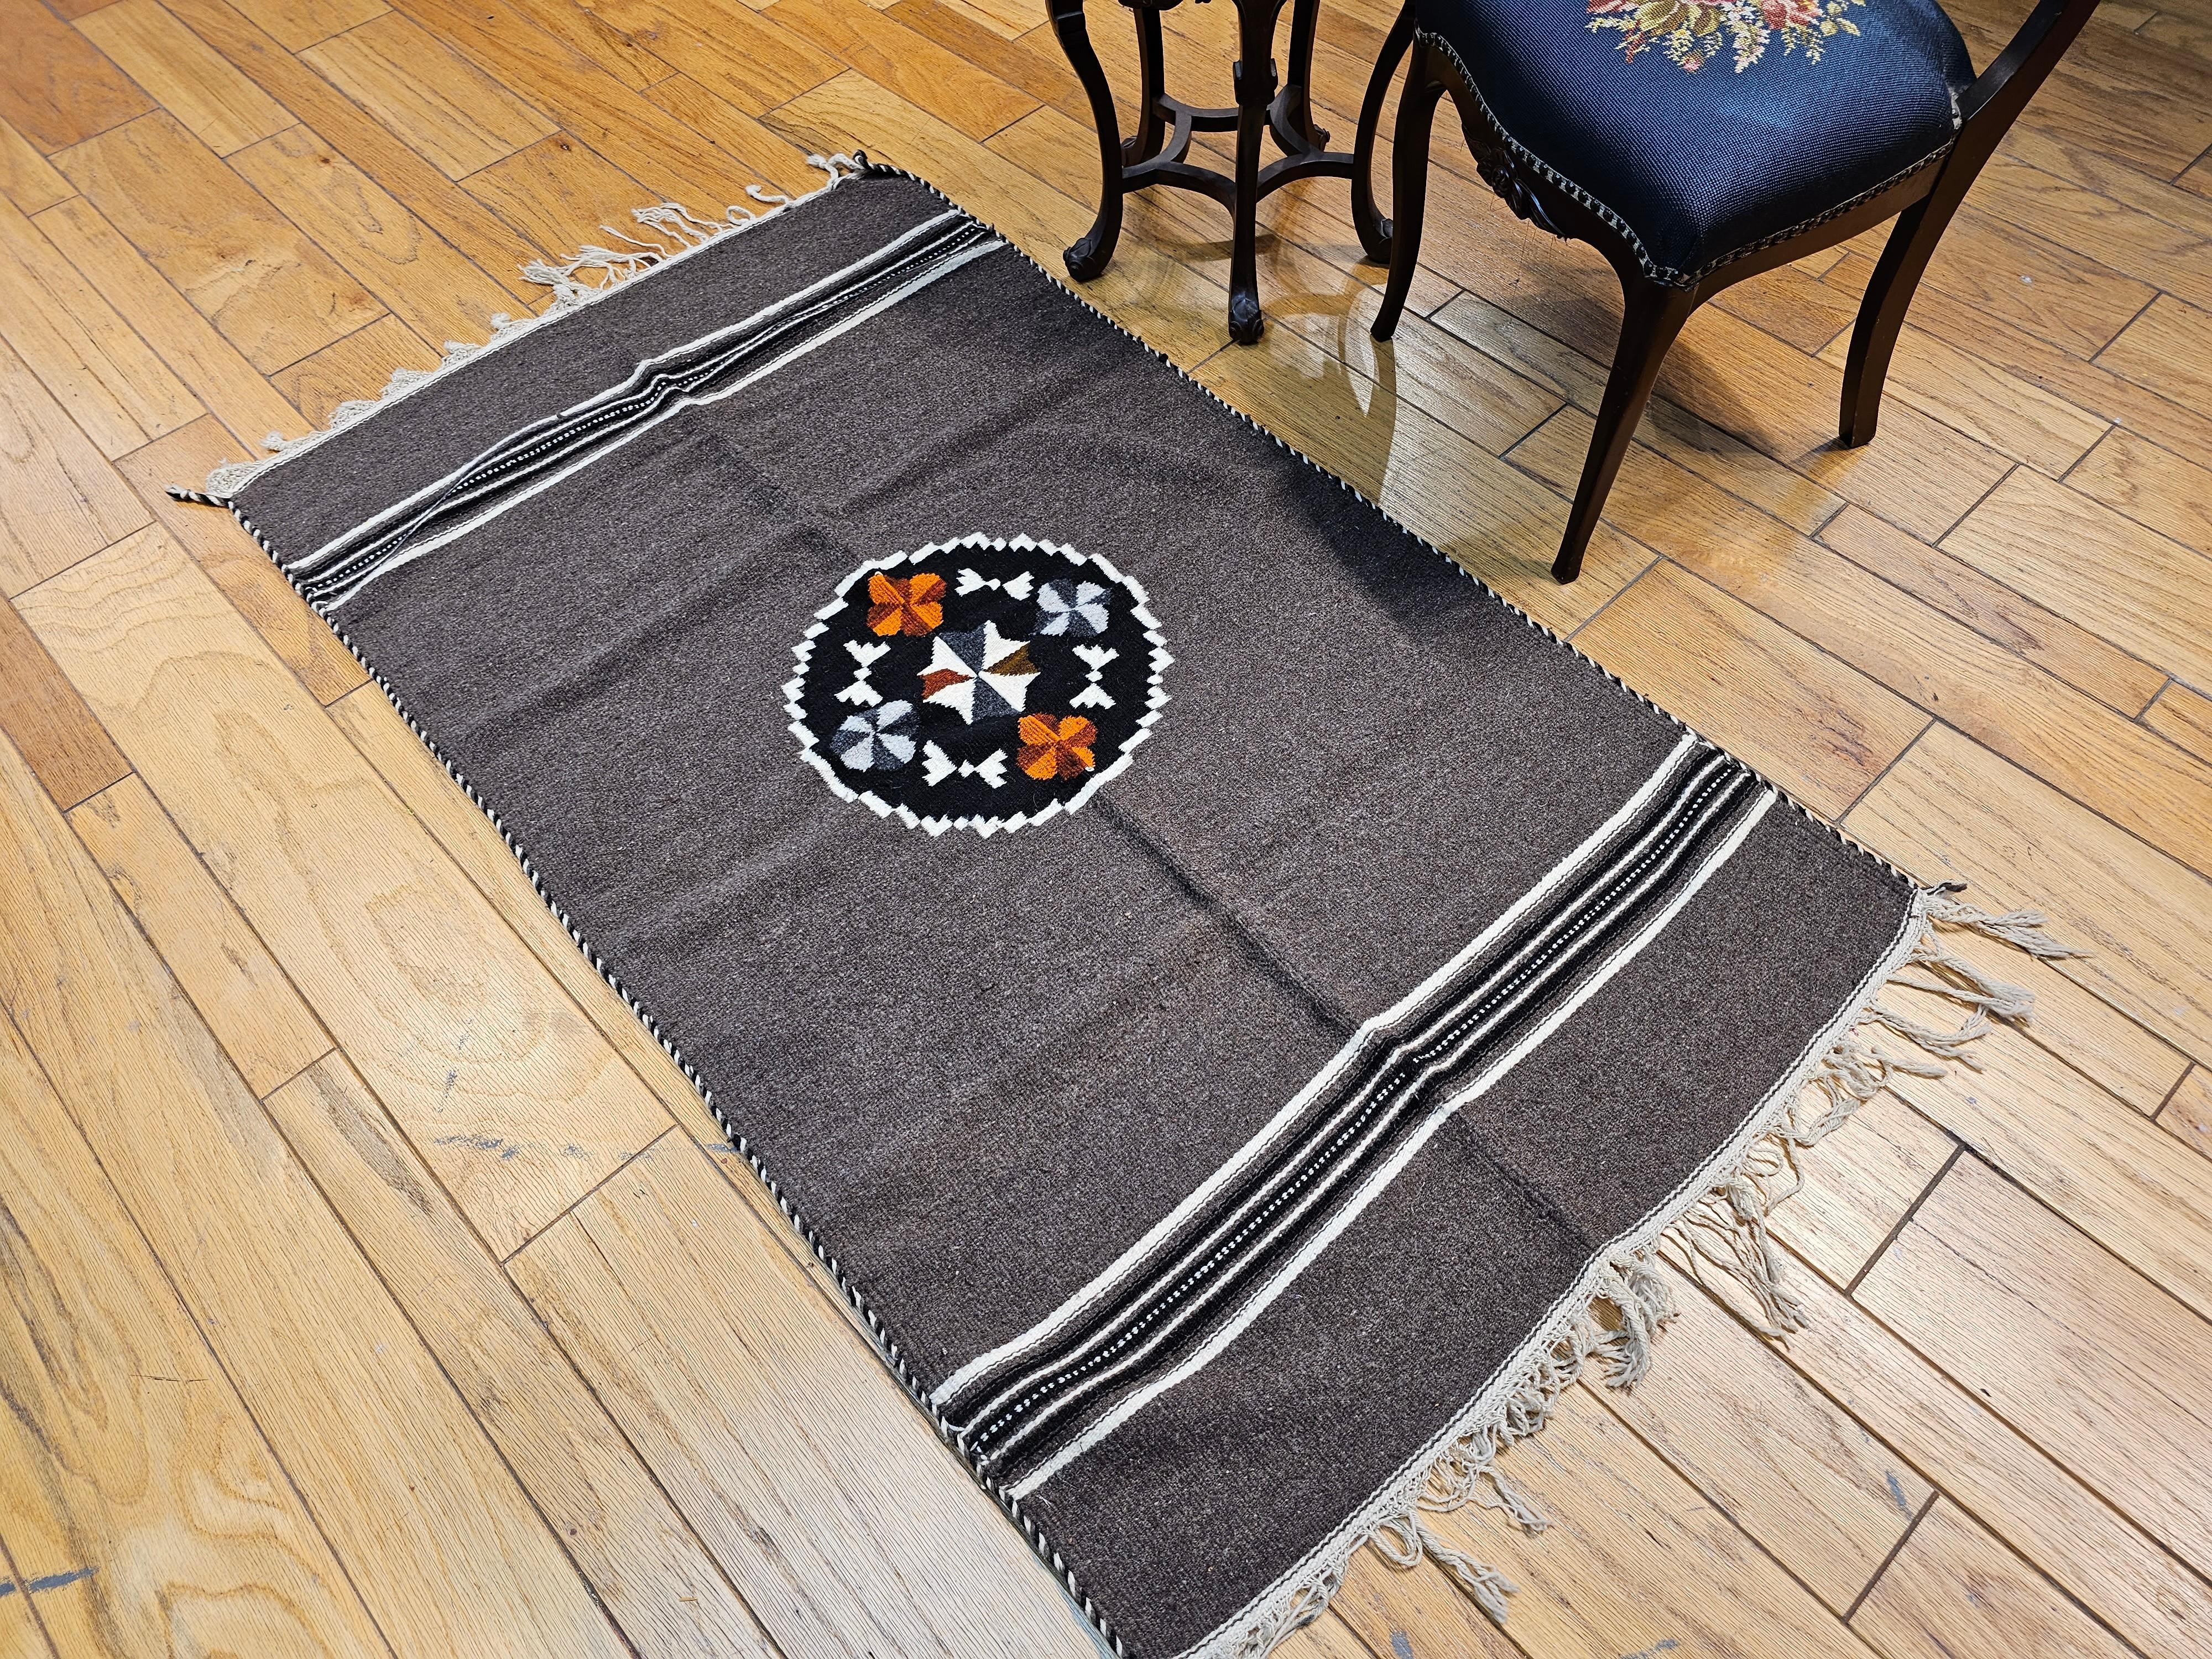 Vintage Mexican Serape Kilim Rug in Dark Gray/Chocolate Colors In Good Condition For Sale In Barrington, IL